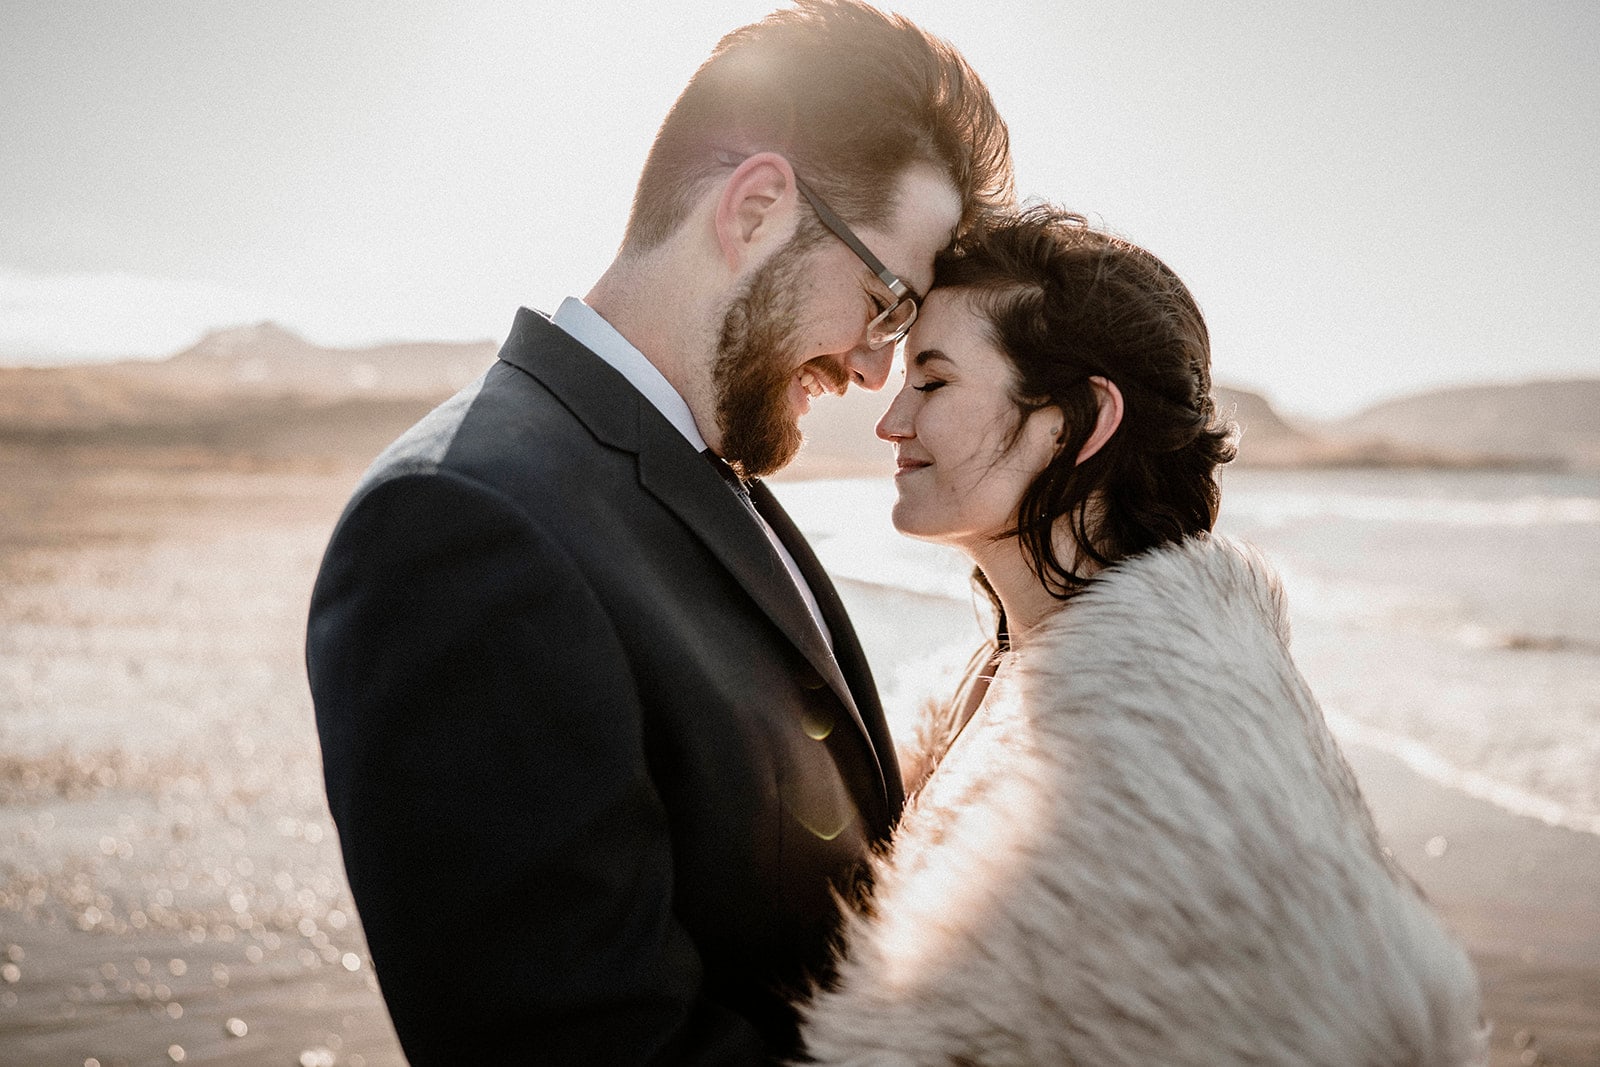 Windswept Elopement: Bride and Groom's Joyous Moment in Western Iceland